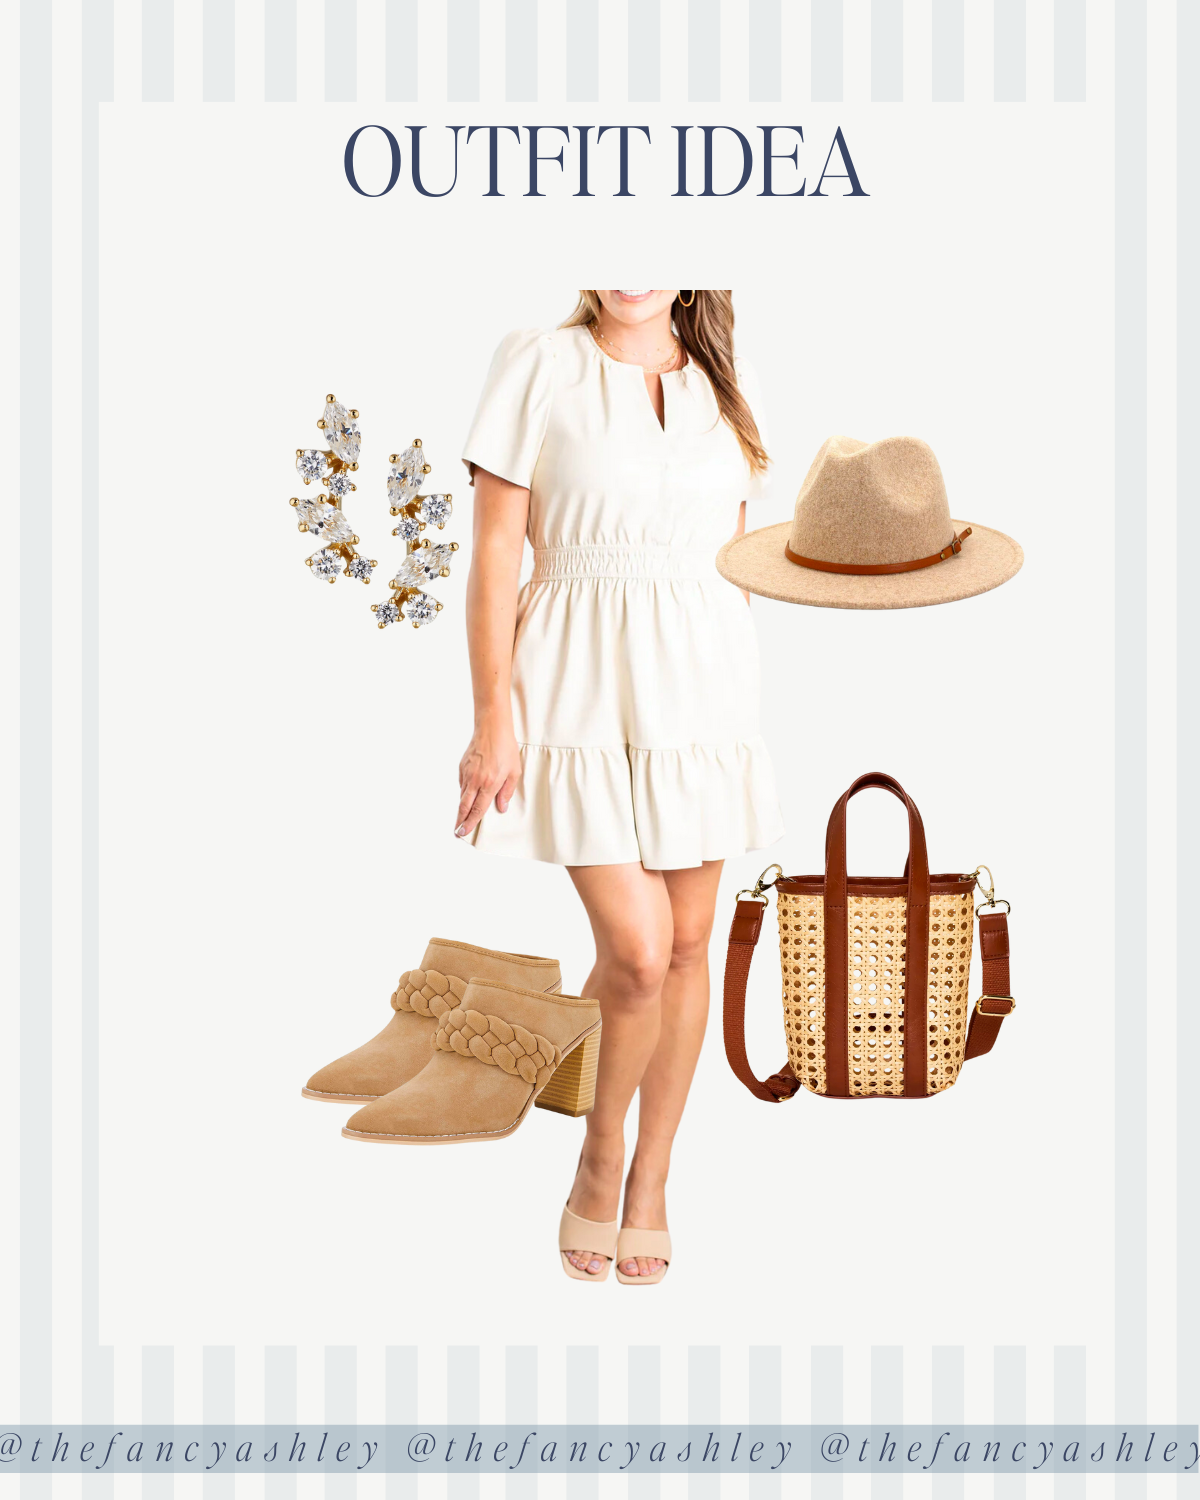 SPRING OUTFIT IDEAS